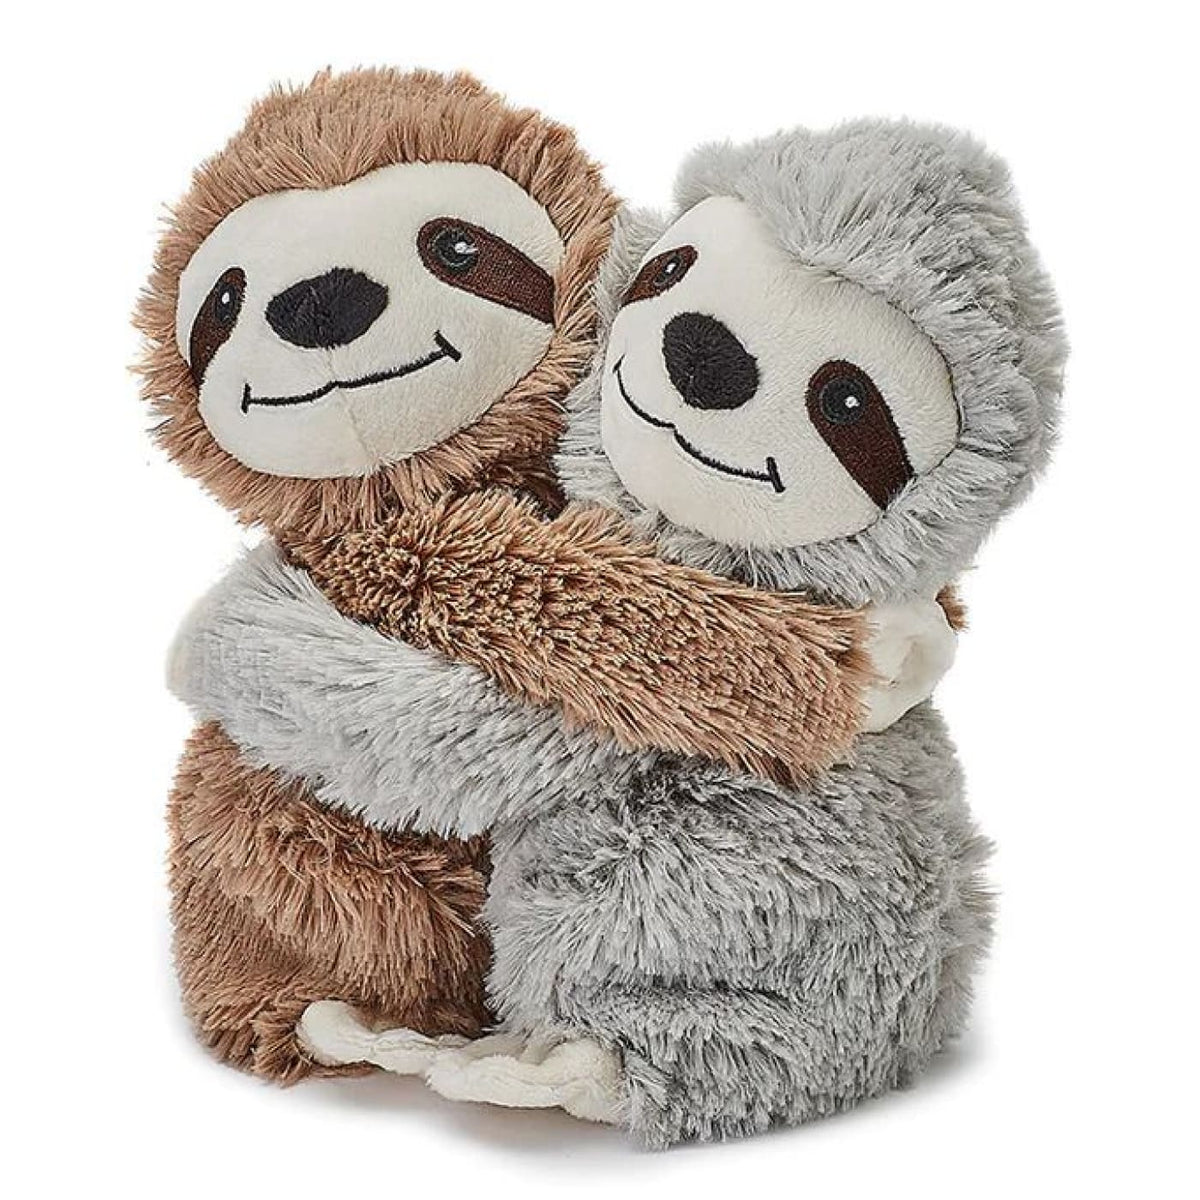 Warmies Heatable Soft Toy Scented with French Lavender - Hugs Sloths - Hugs Sloths - HEALTH &amp; HOME SAFETY - THERMOMETERS/MEDICINAL